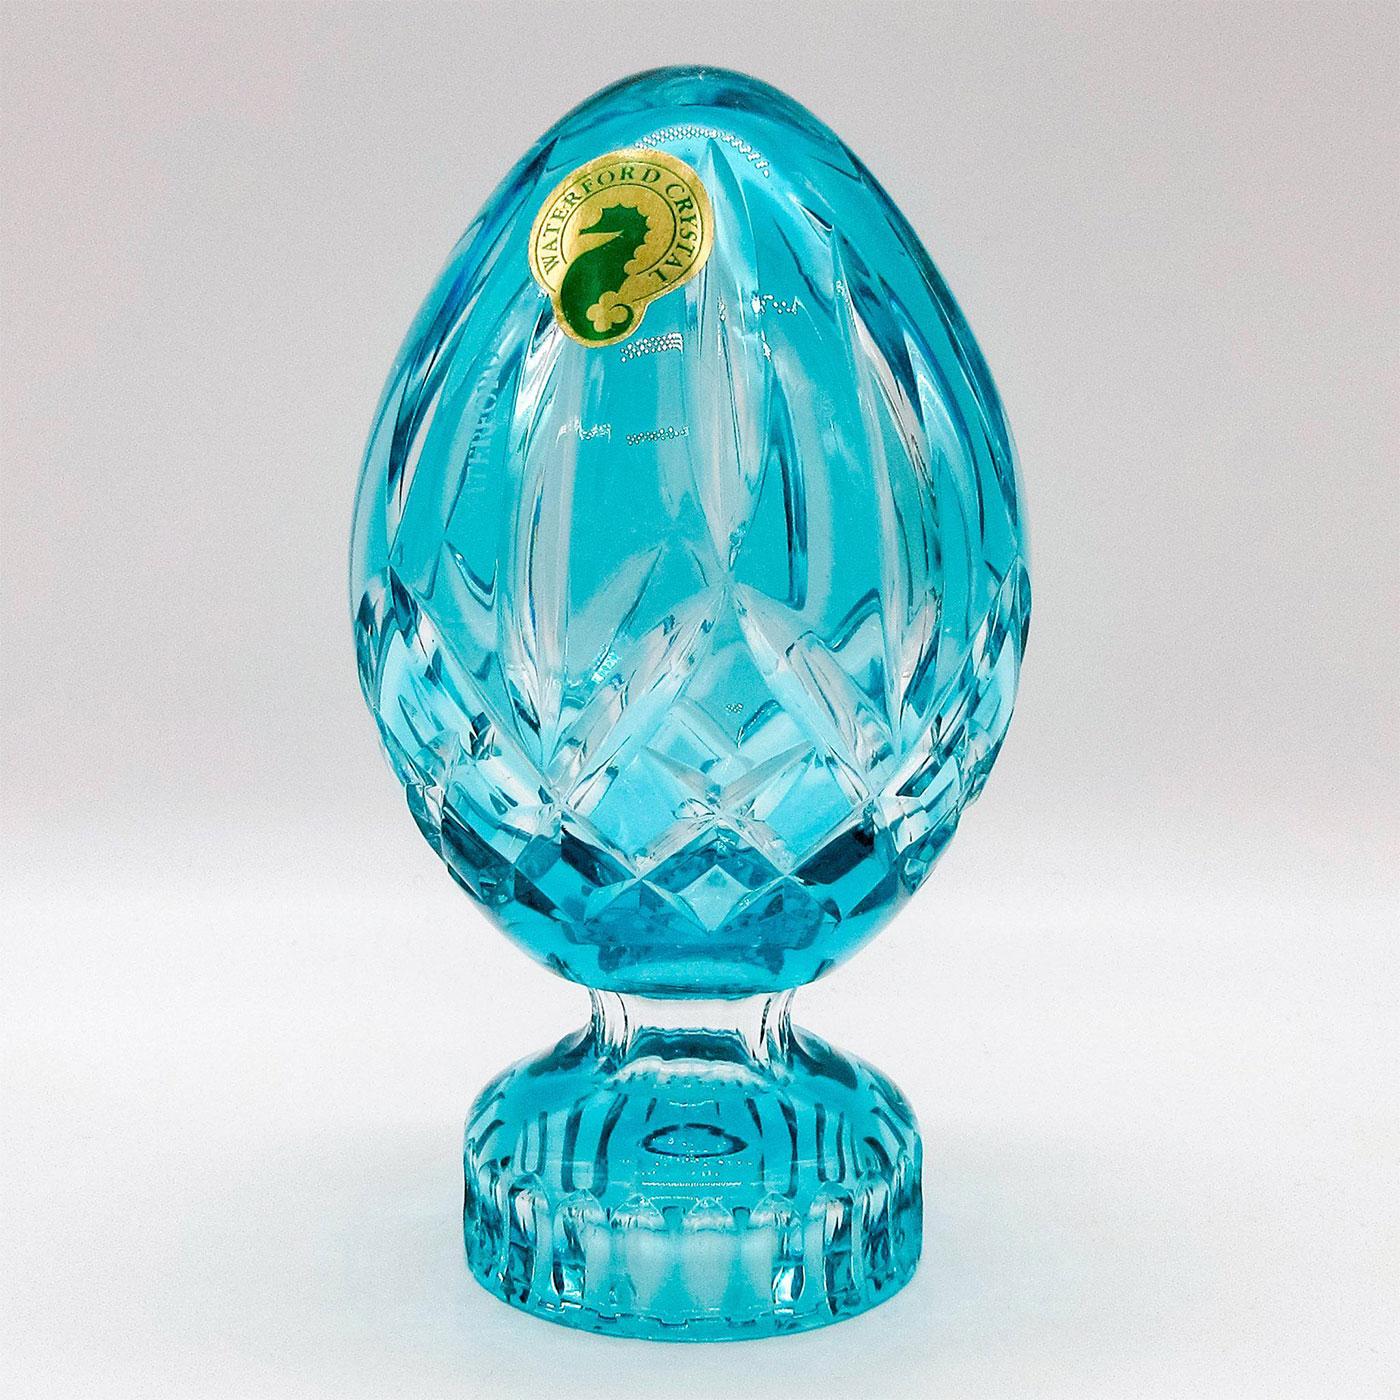 Waterford Crystal Egg Paperweight, Turquoise, Lismore